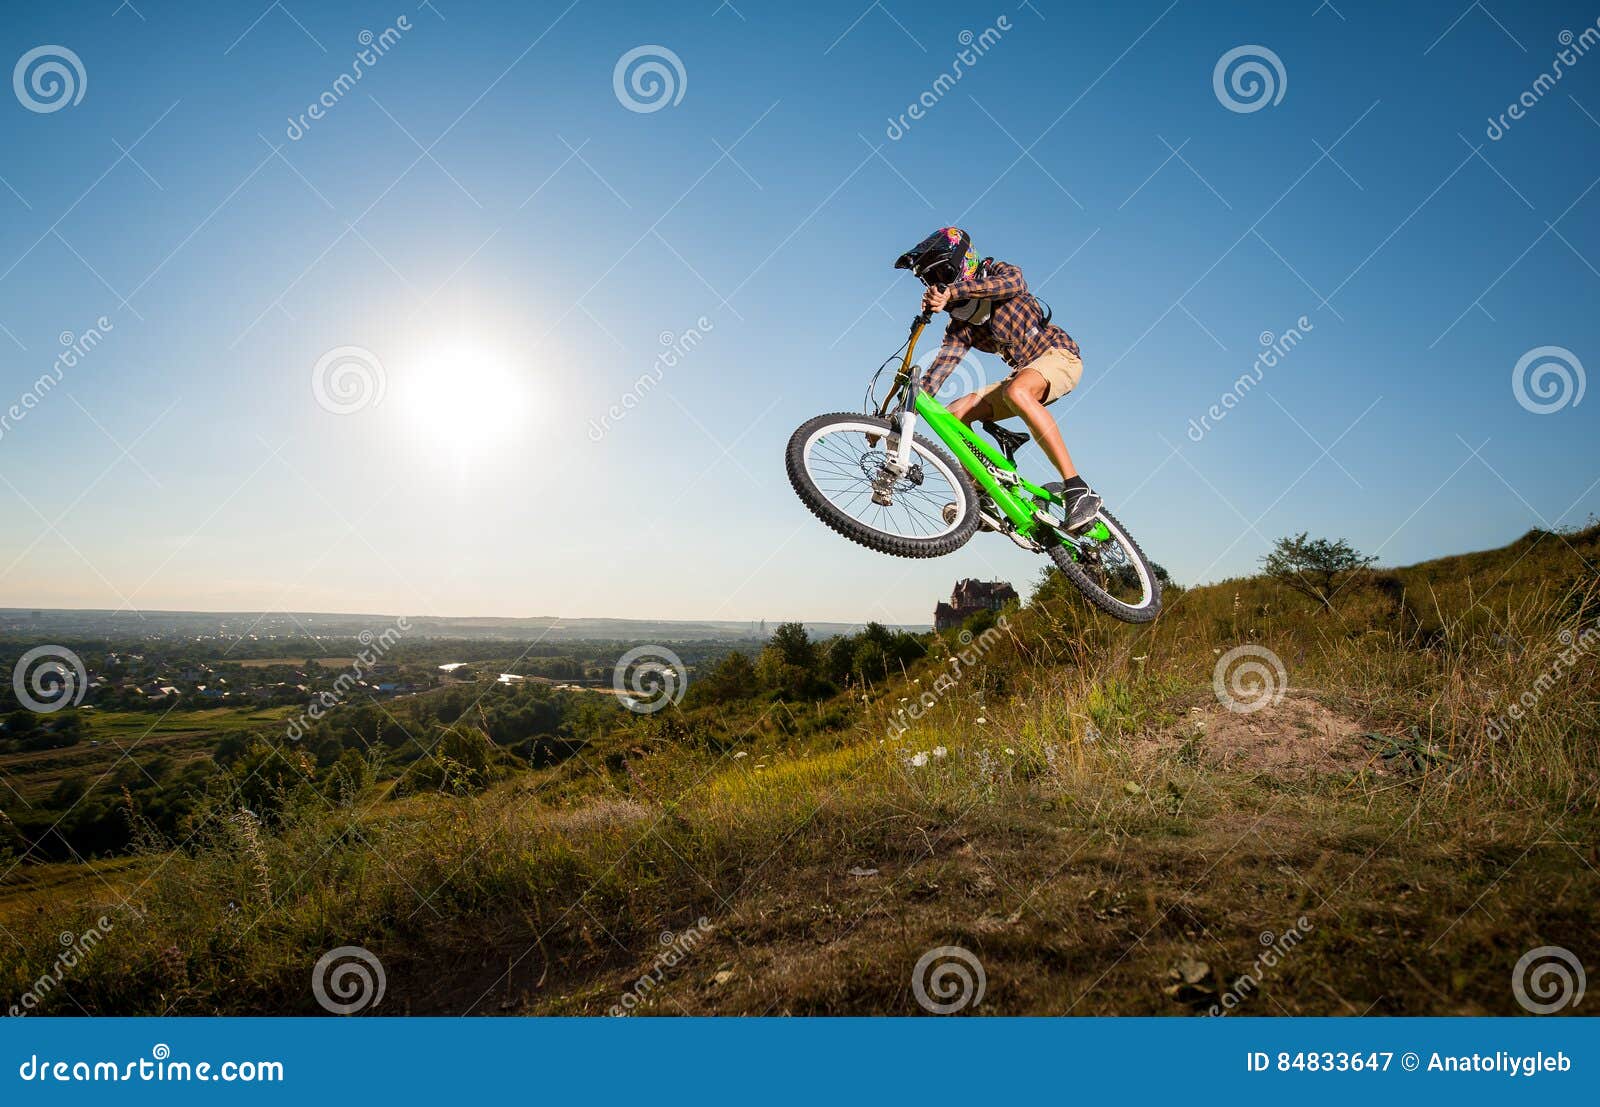 Cyclist Riding Downhill on Mountain Bike on the Hill Stock Image ...